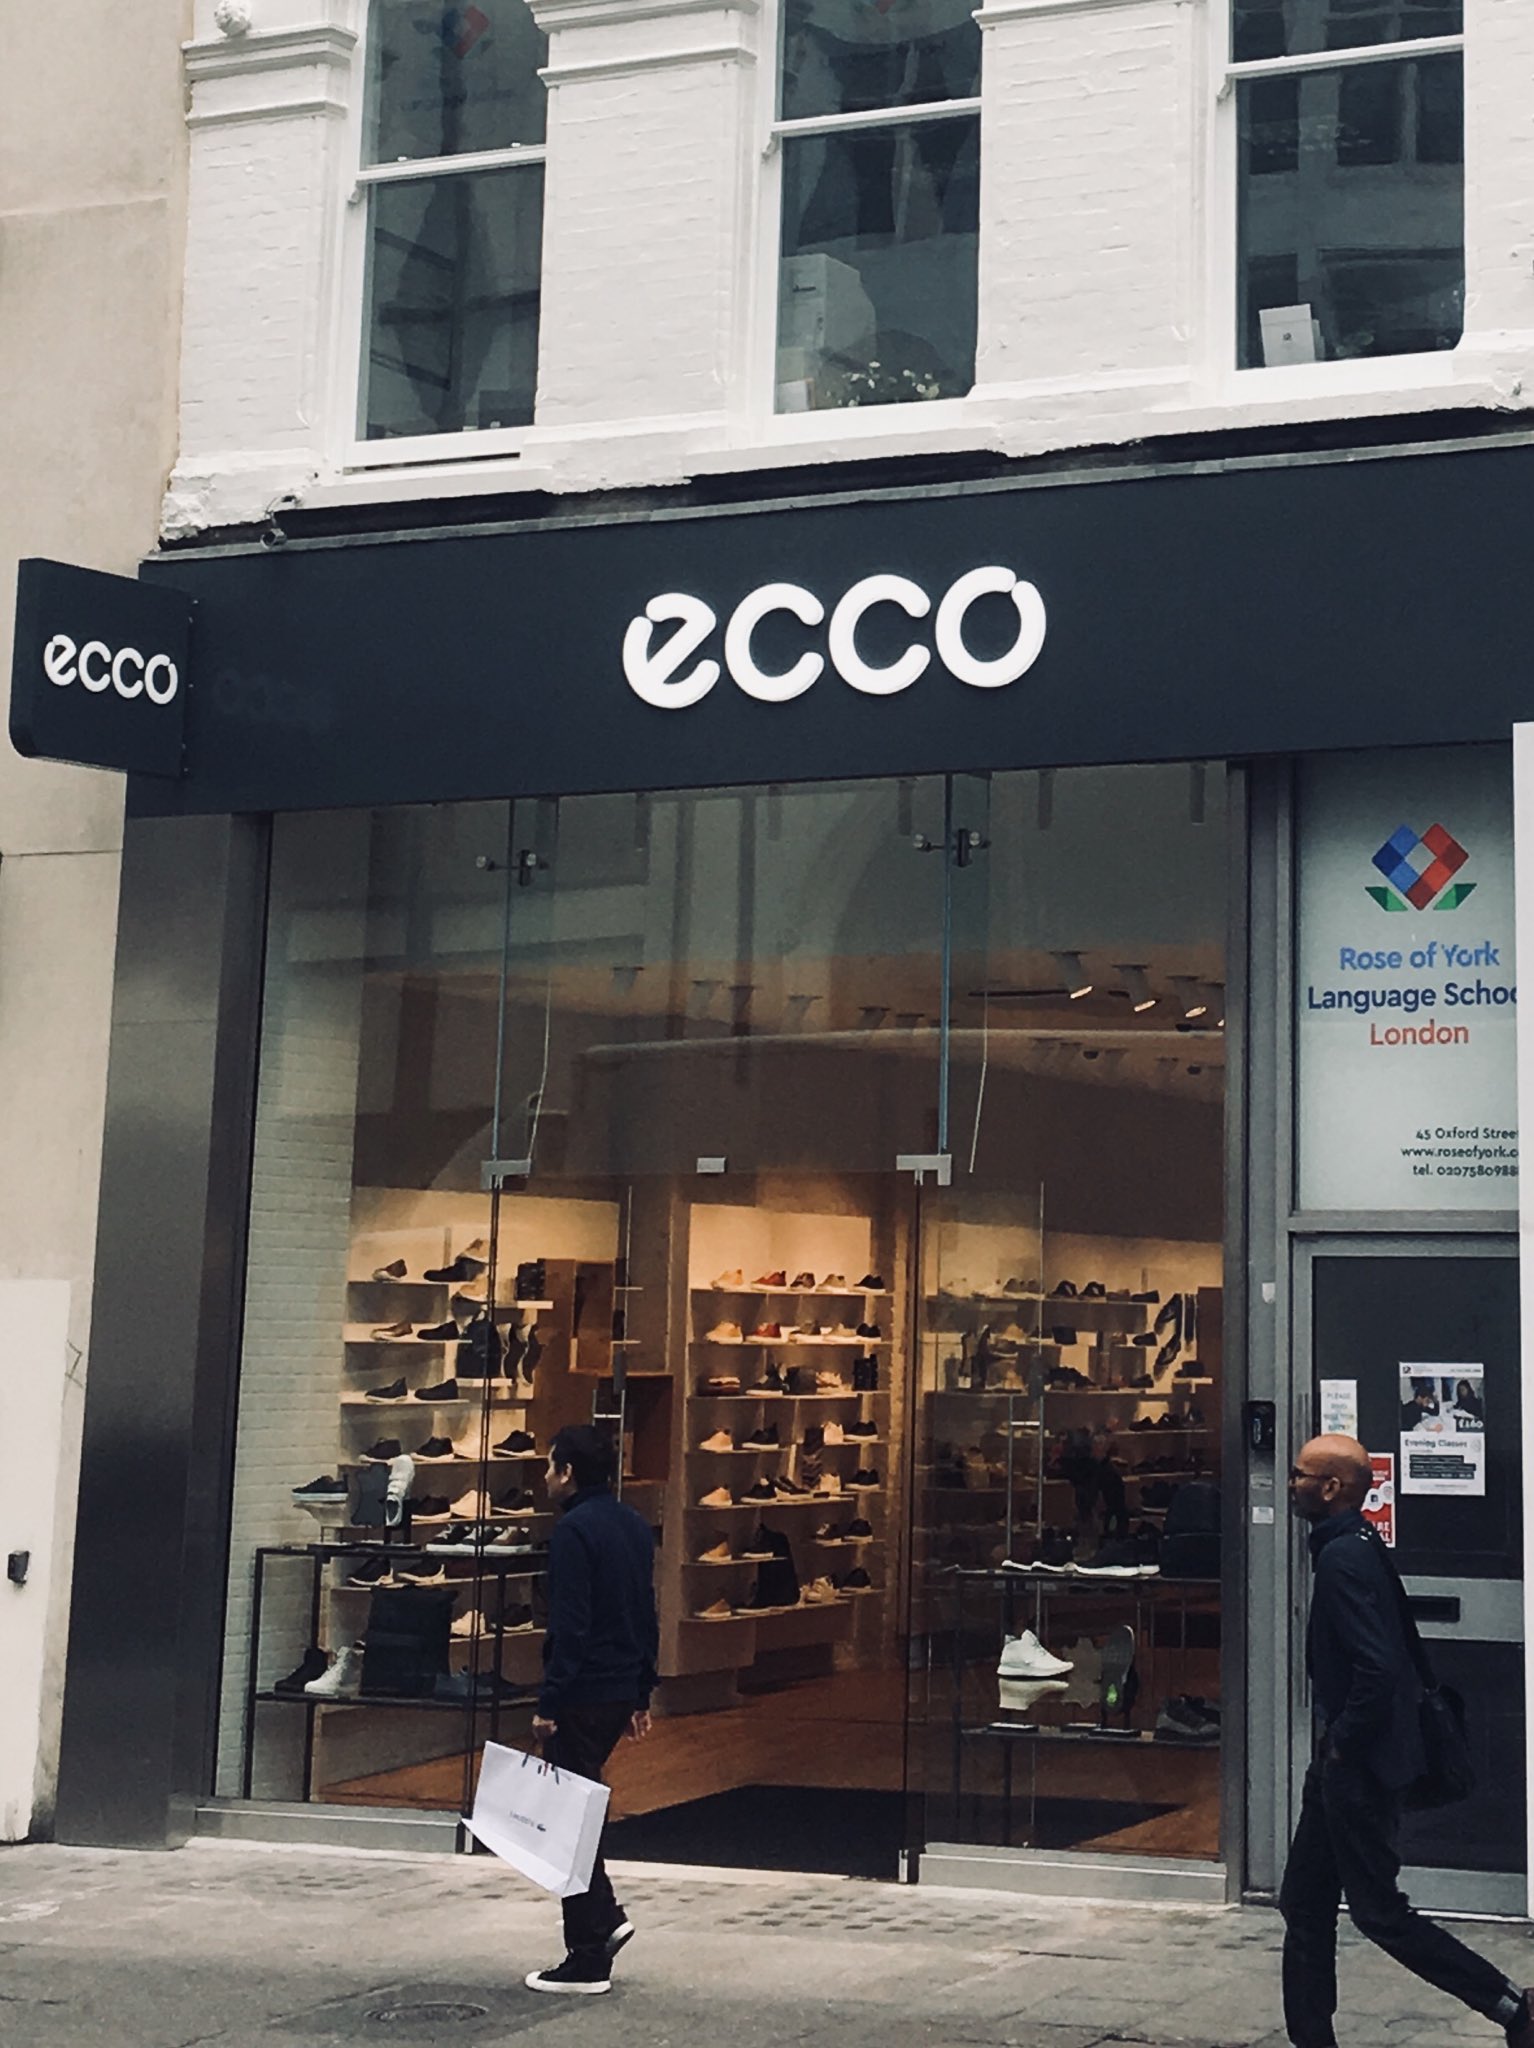 David Carlsson on Twitter: "The ⁦@ECCOshoes⁩ just opened on Oxford Street, advised by ⁦@Colliers_London⁩. Further opportunities throughout the UK are being identified. #Ecco #Shoes #London #OxfordStreet https://t.co/hM6m6cpEhU" / Twitter